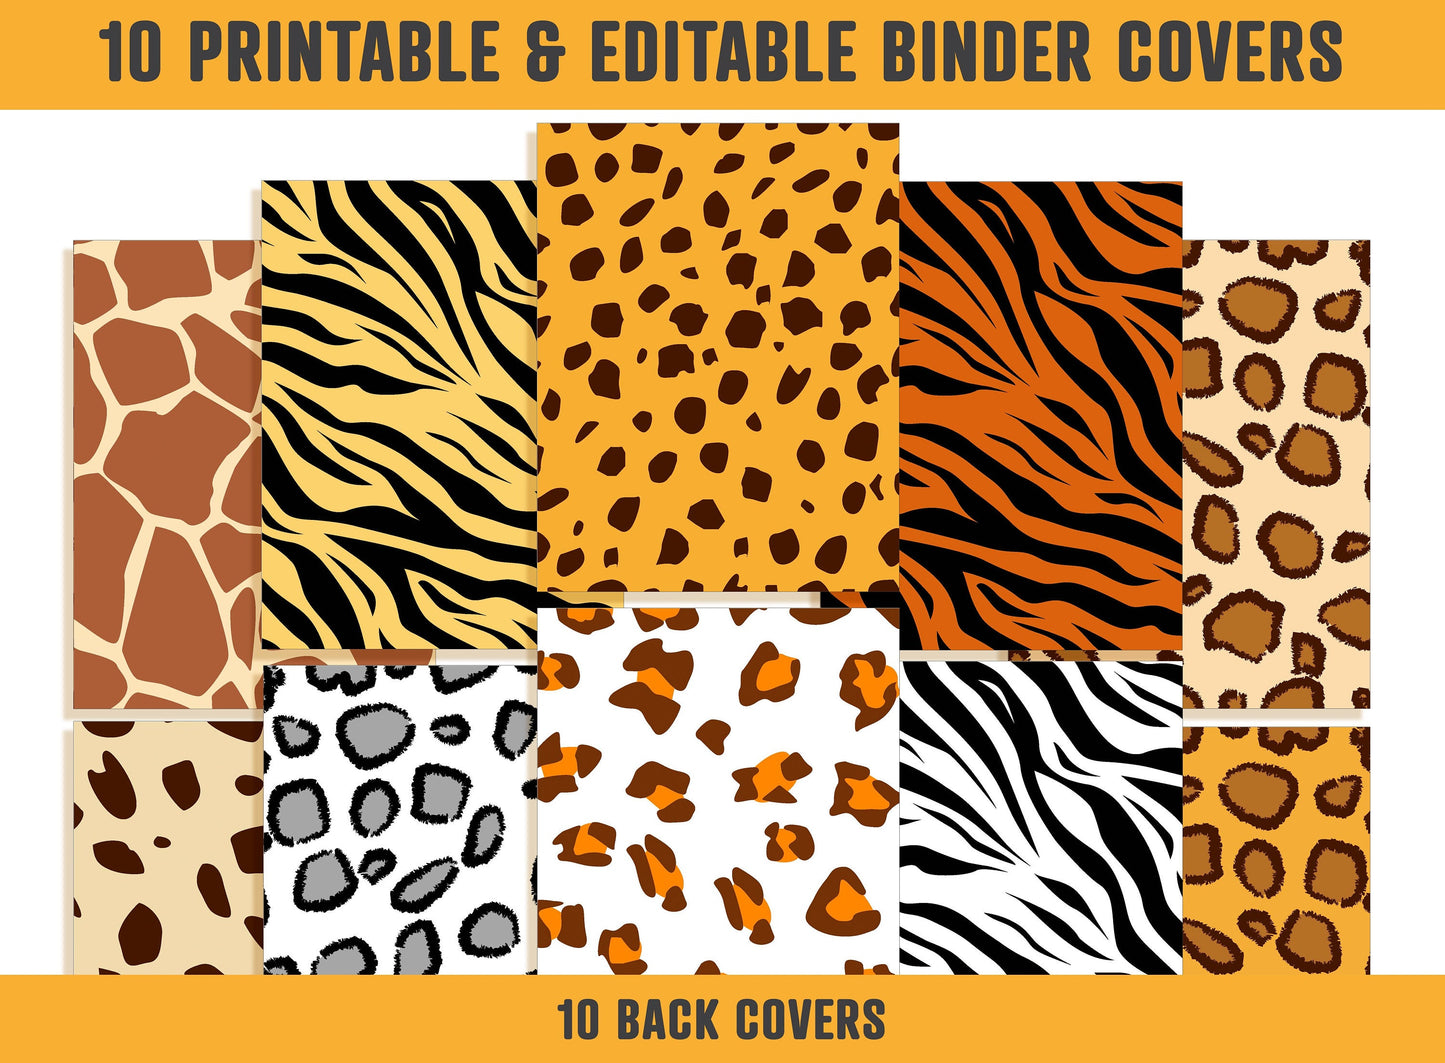 Binder Cover and Spine, 10 Printable & Editable Binder Covers+Spines, Binder Cover Template, Binder Insert, Planner Cover for Teacher/School